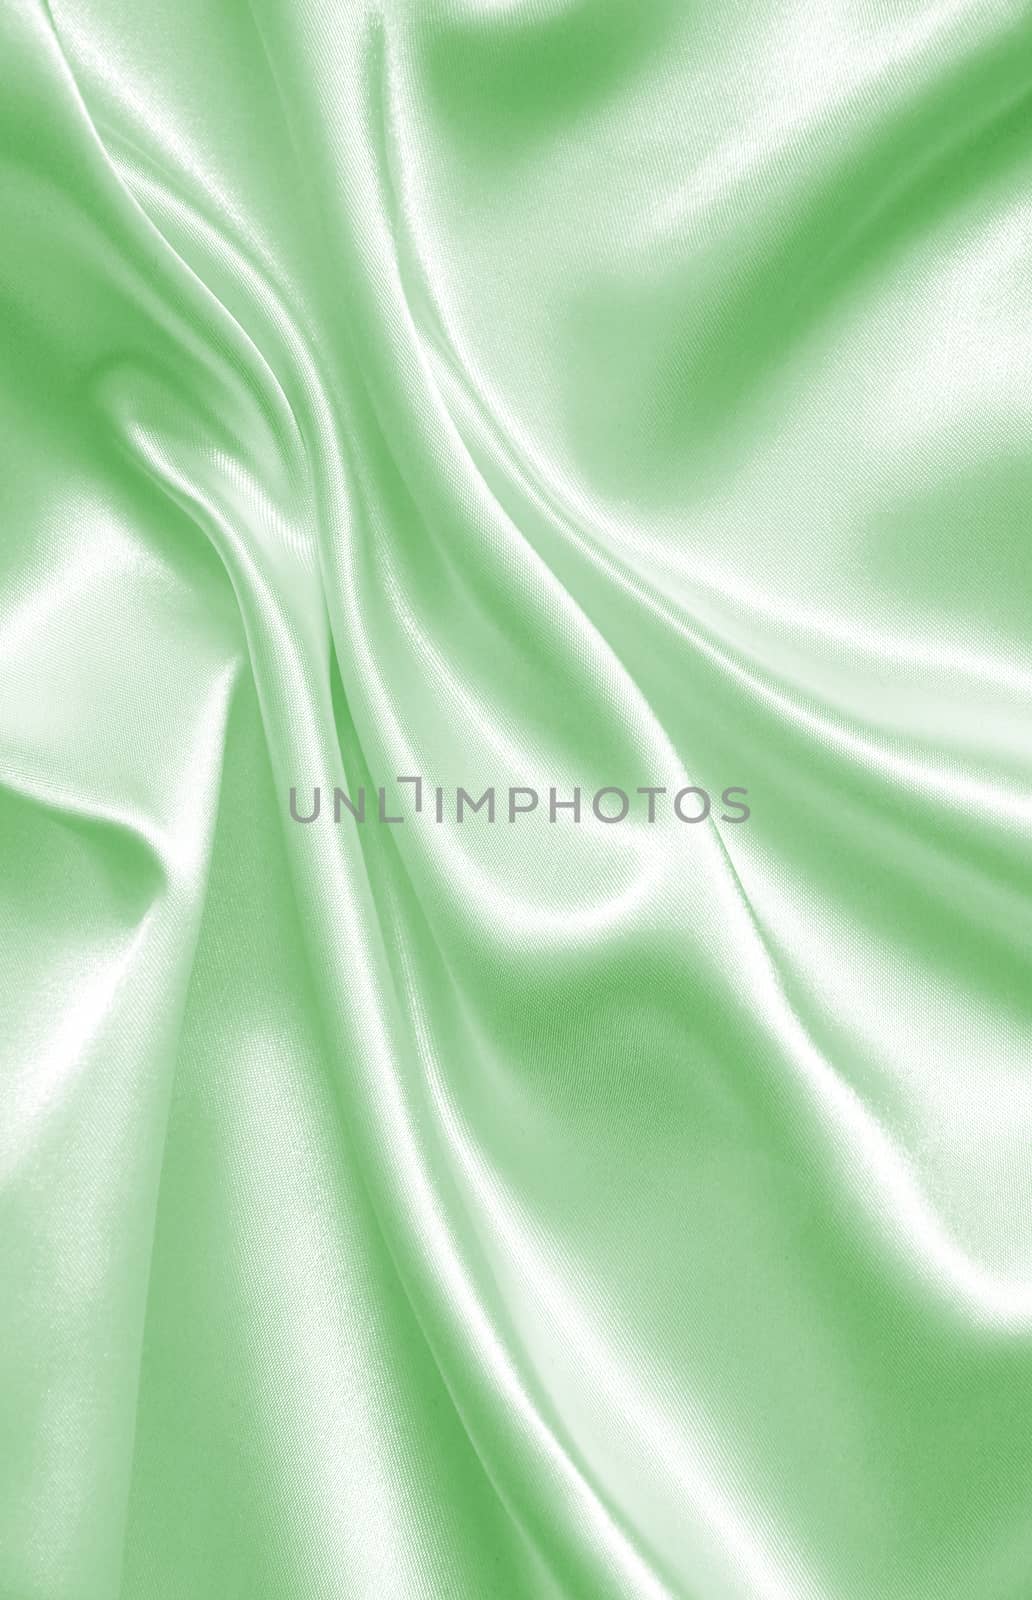 Smooth elegant green silk or satin as background by oxanatravel